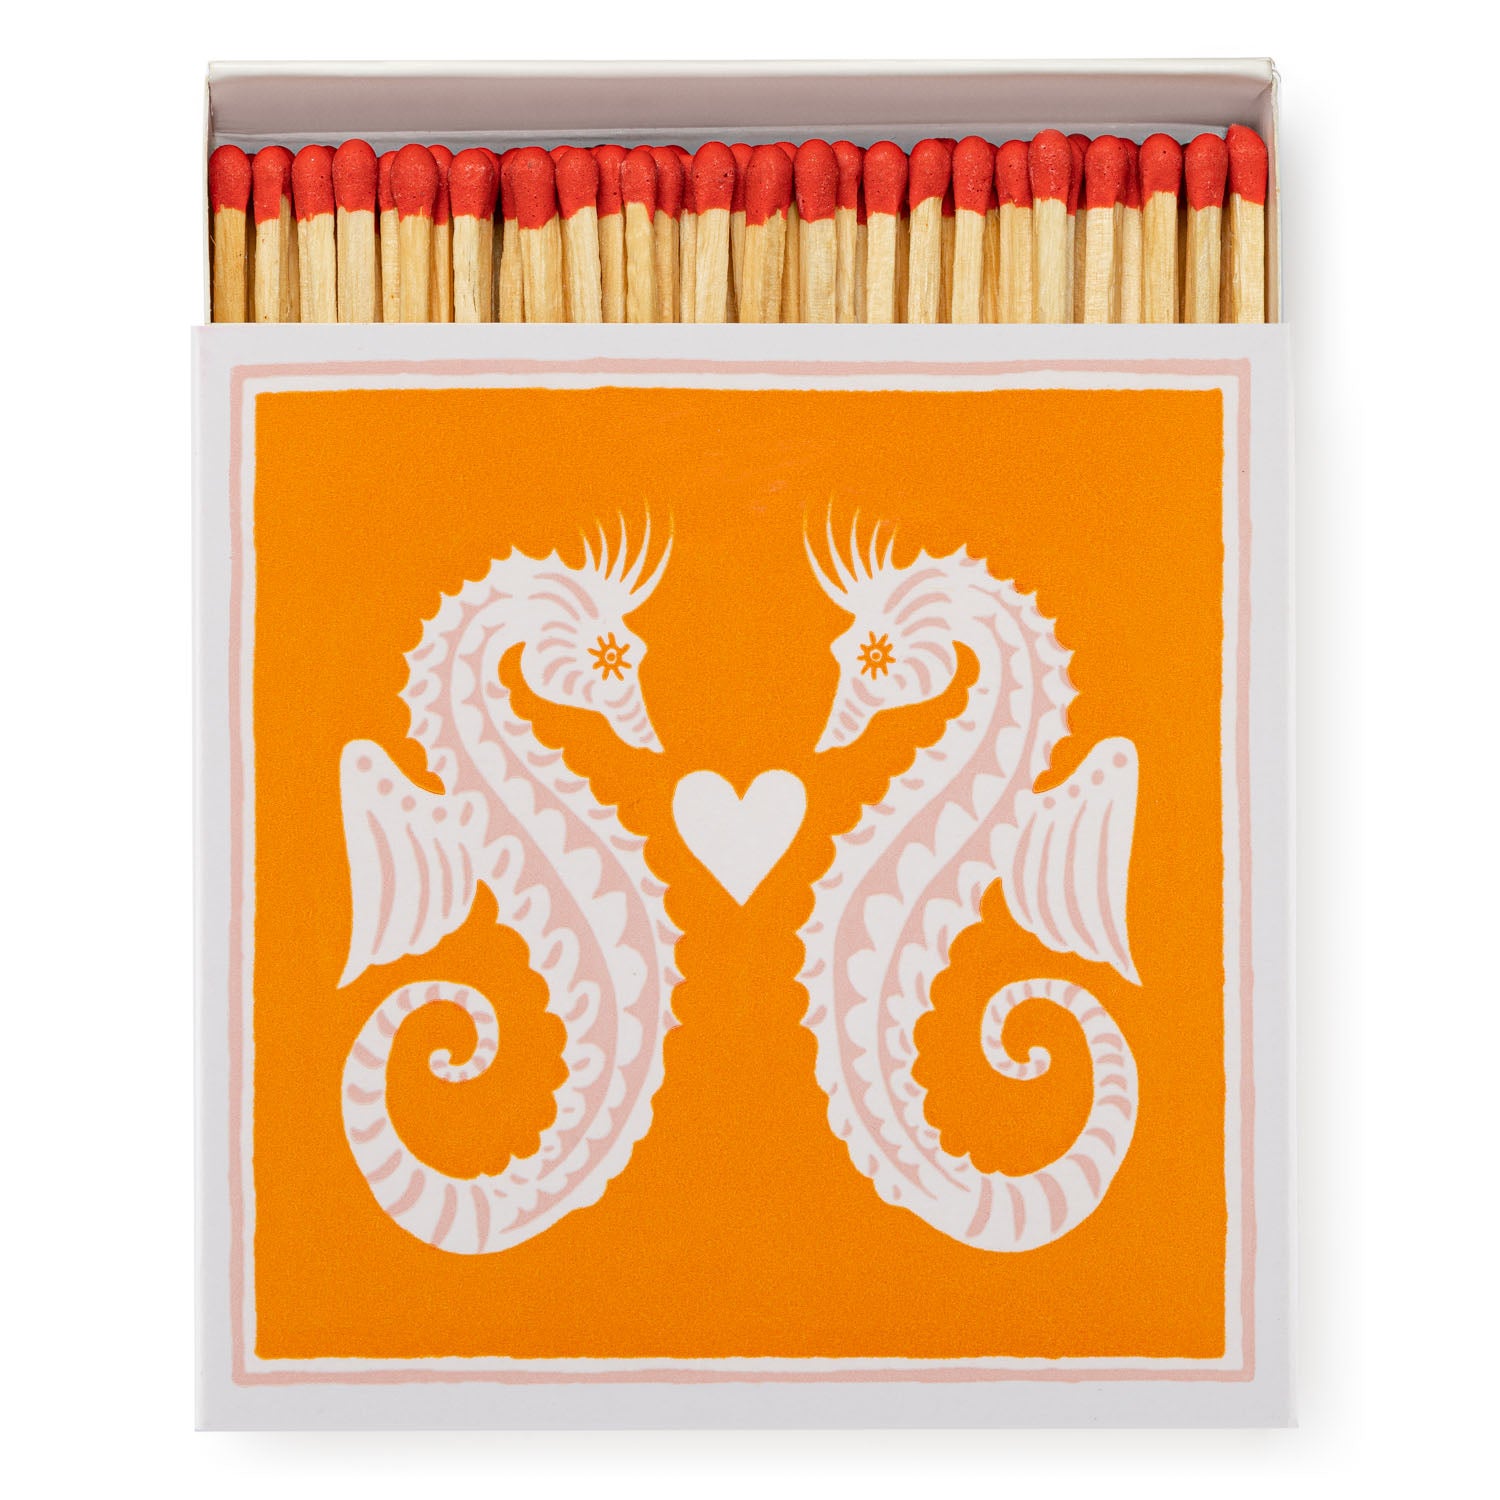 Long Matches - Square Box | Seahorses | by Archivist - Lifestory